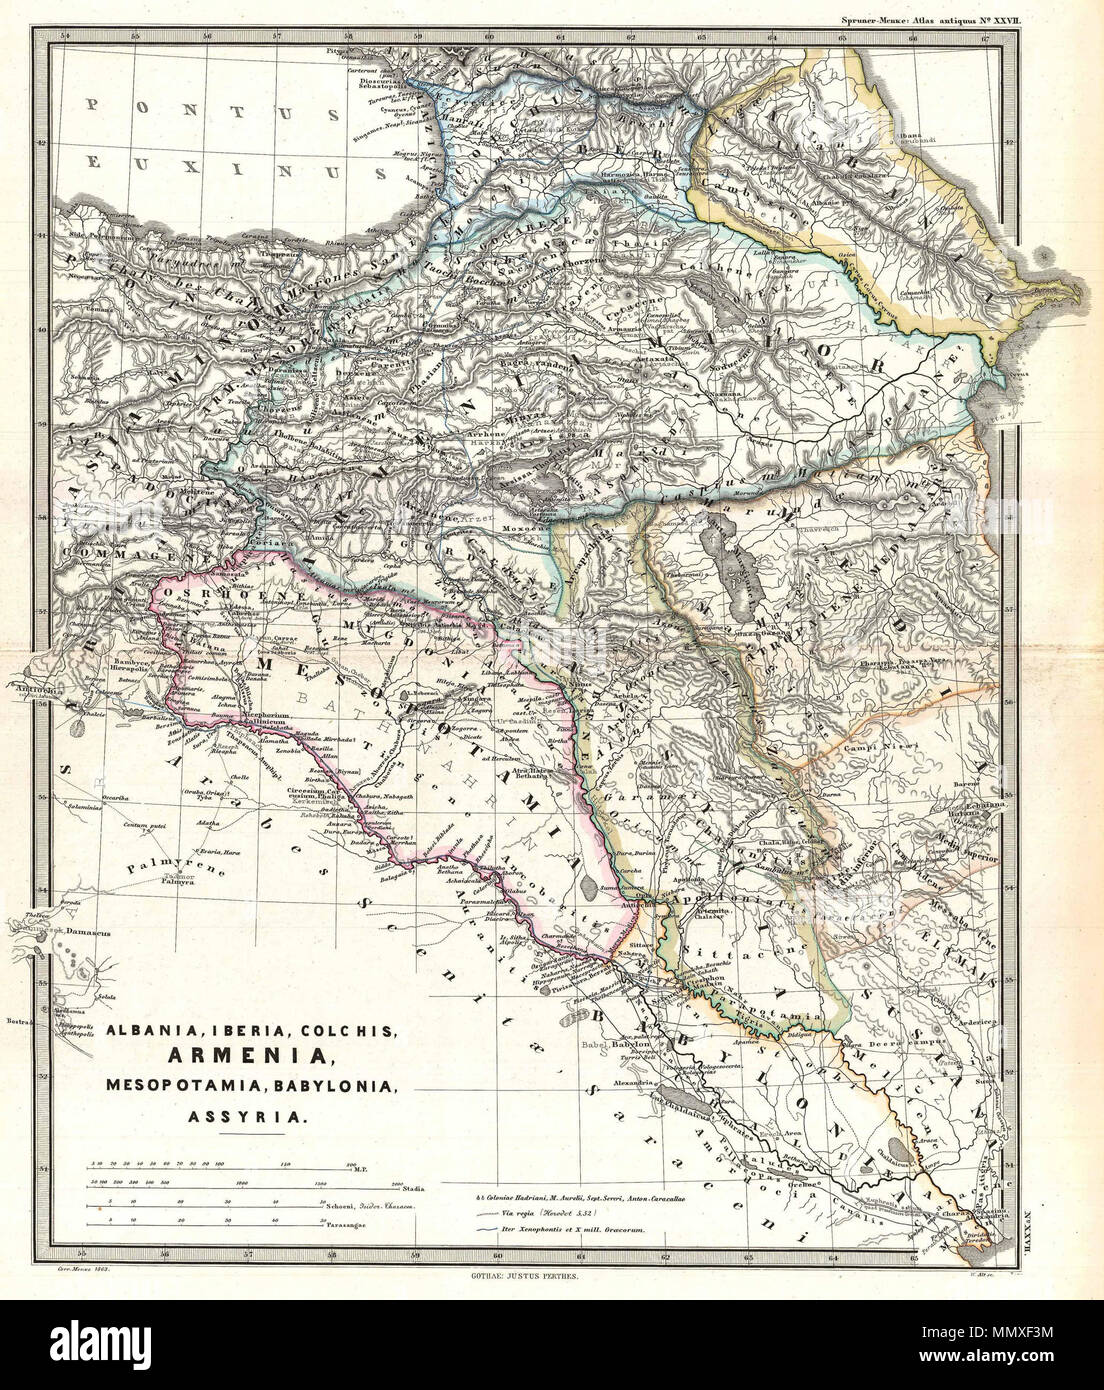 .  English: A particularly interesting map, this is Karl von Spruner’s 1865 rendering of the Caucasus and Mesopotamia in antiquity. Centered on Lake Van (modern day eastern Turkey), this map covers the Caucasus region between the Black Sea and the Caspian Sea, then southwards to the Fertile Crescent as far as the Euphrates River, Babylonia, and the head of the Persian Gulf. These regions include the modern day countries of Iraq, Armenia, Georgia, Azerbaijan, and adjacent parts of Syria, Turkey, Iran, and the North Caucasus. Like most of Spruner’s work this example overlays ancient political ge Stock Photo